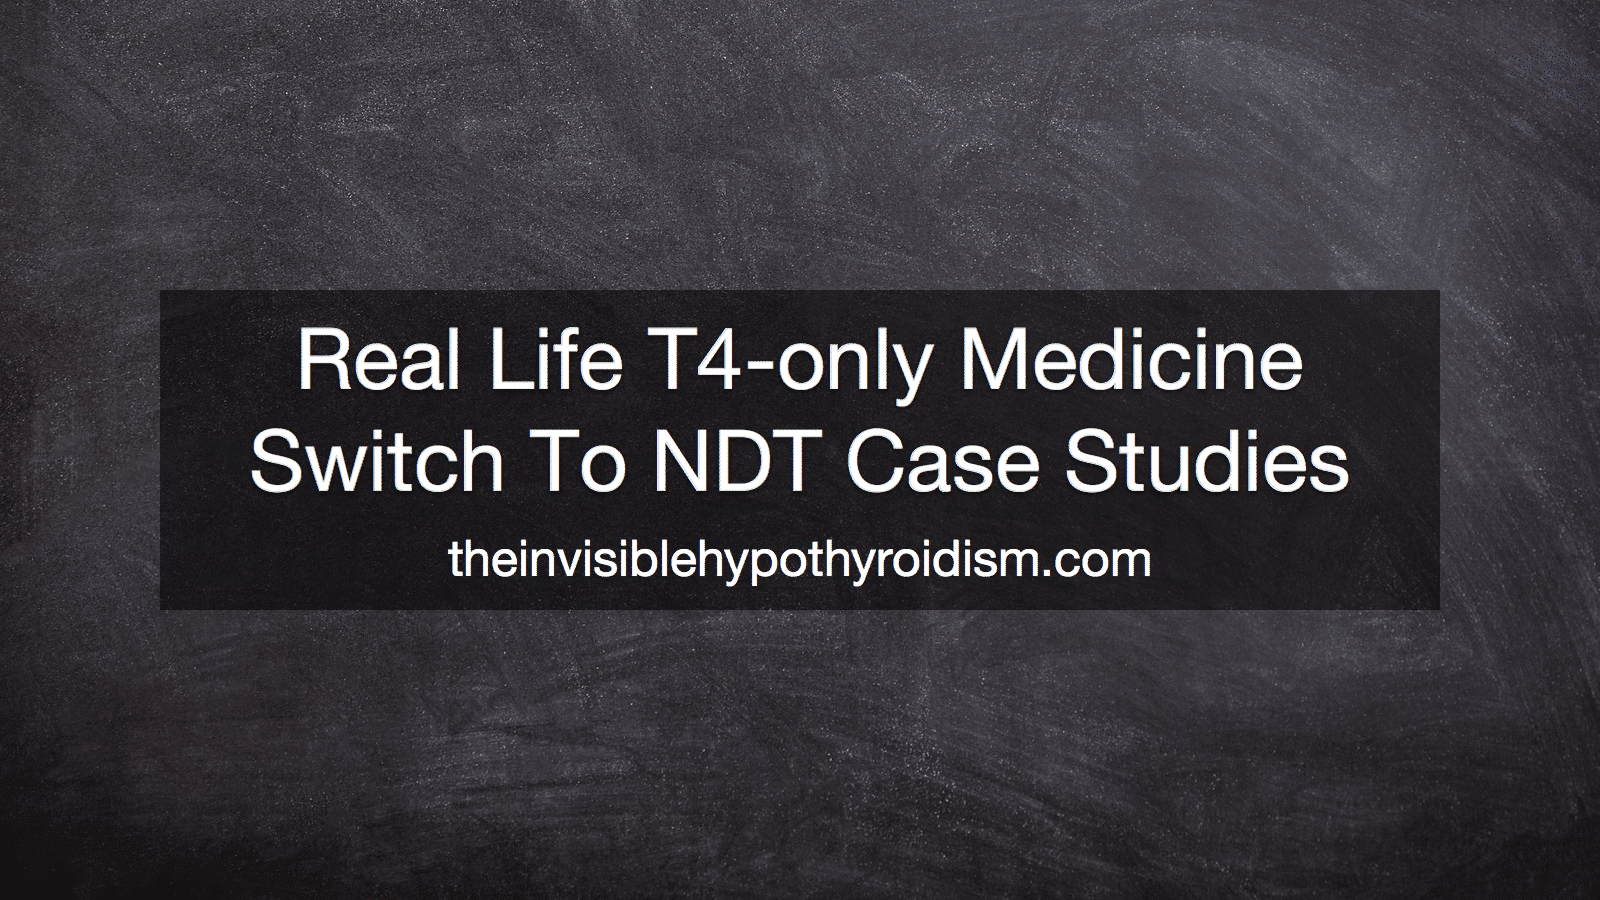 Real Life T4-only Medicine Switch To NDT Case Studies